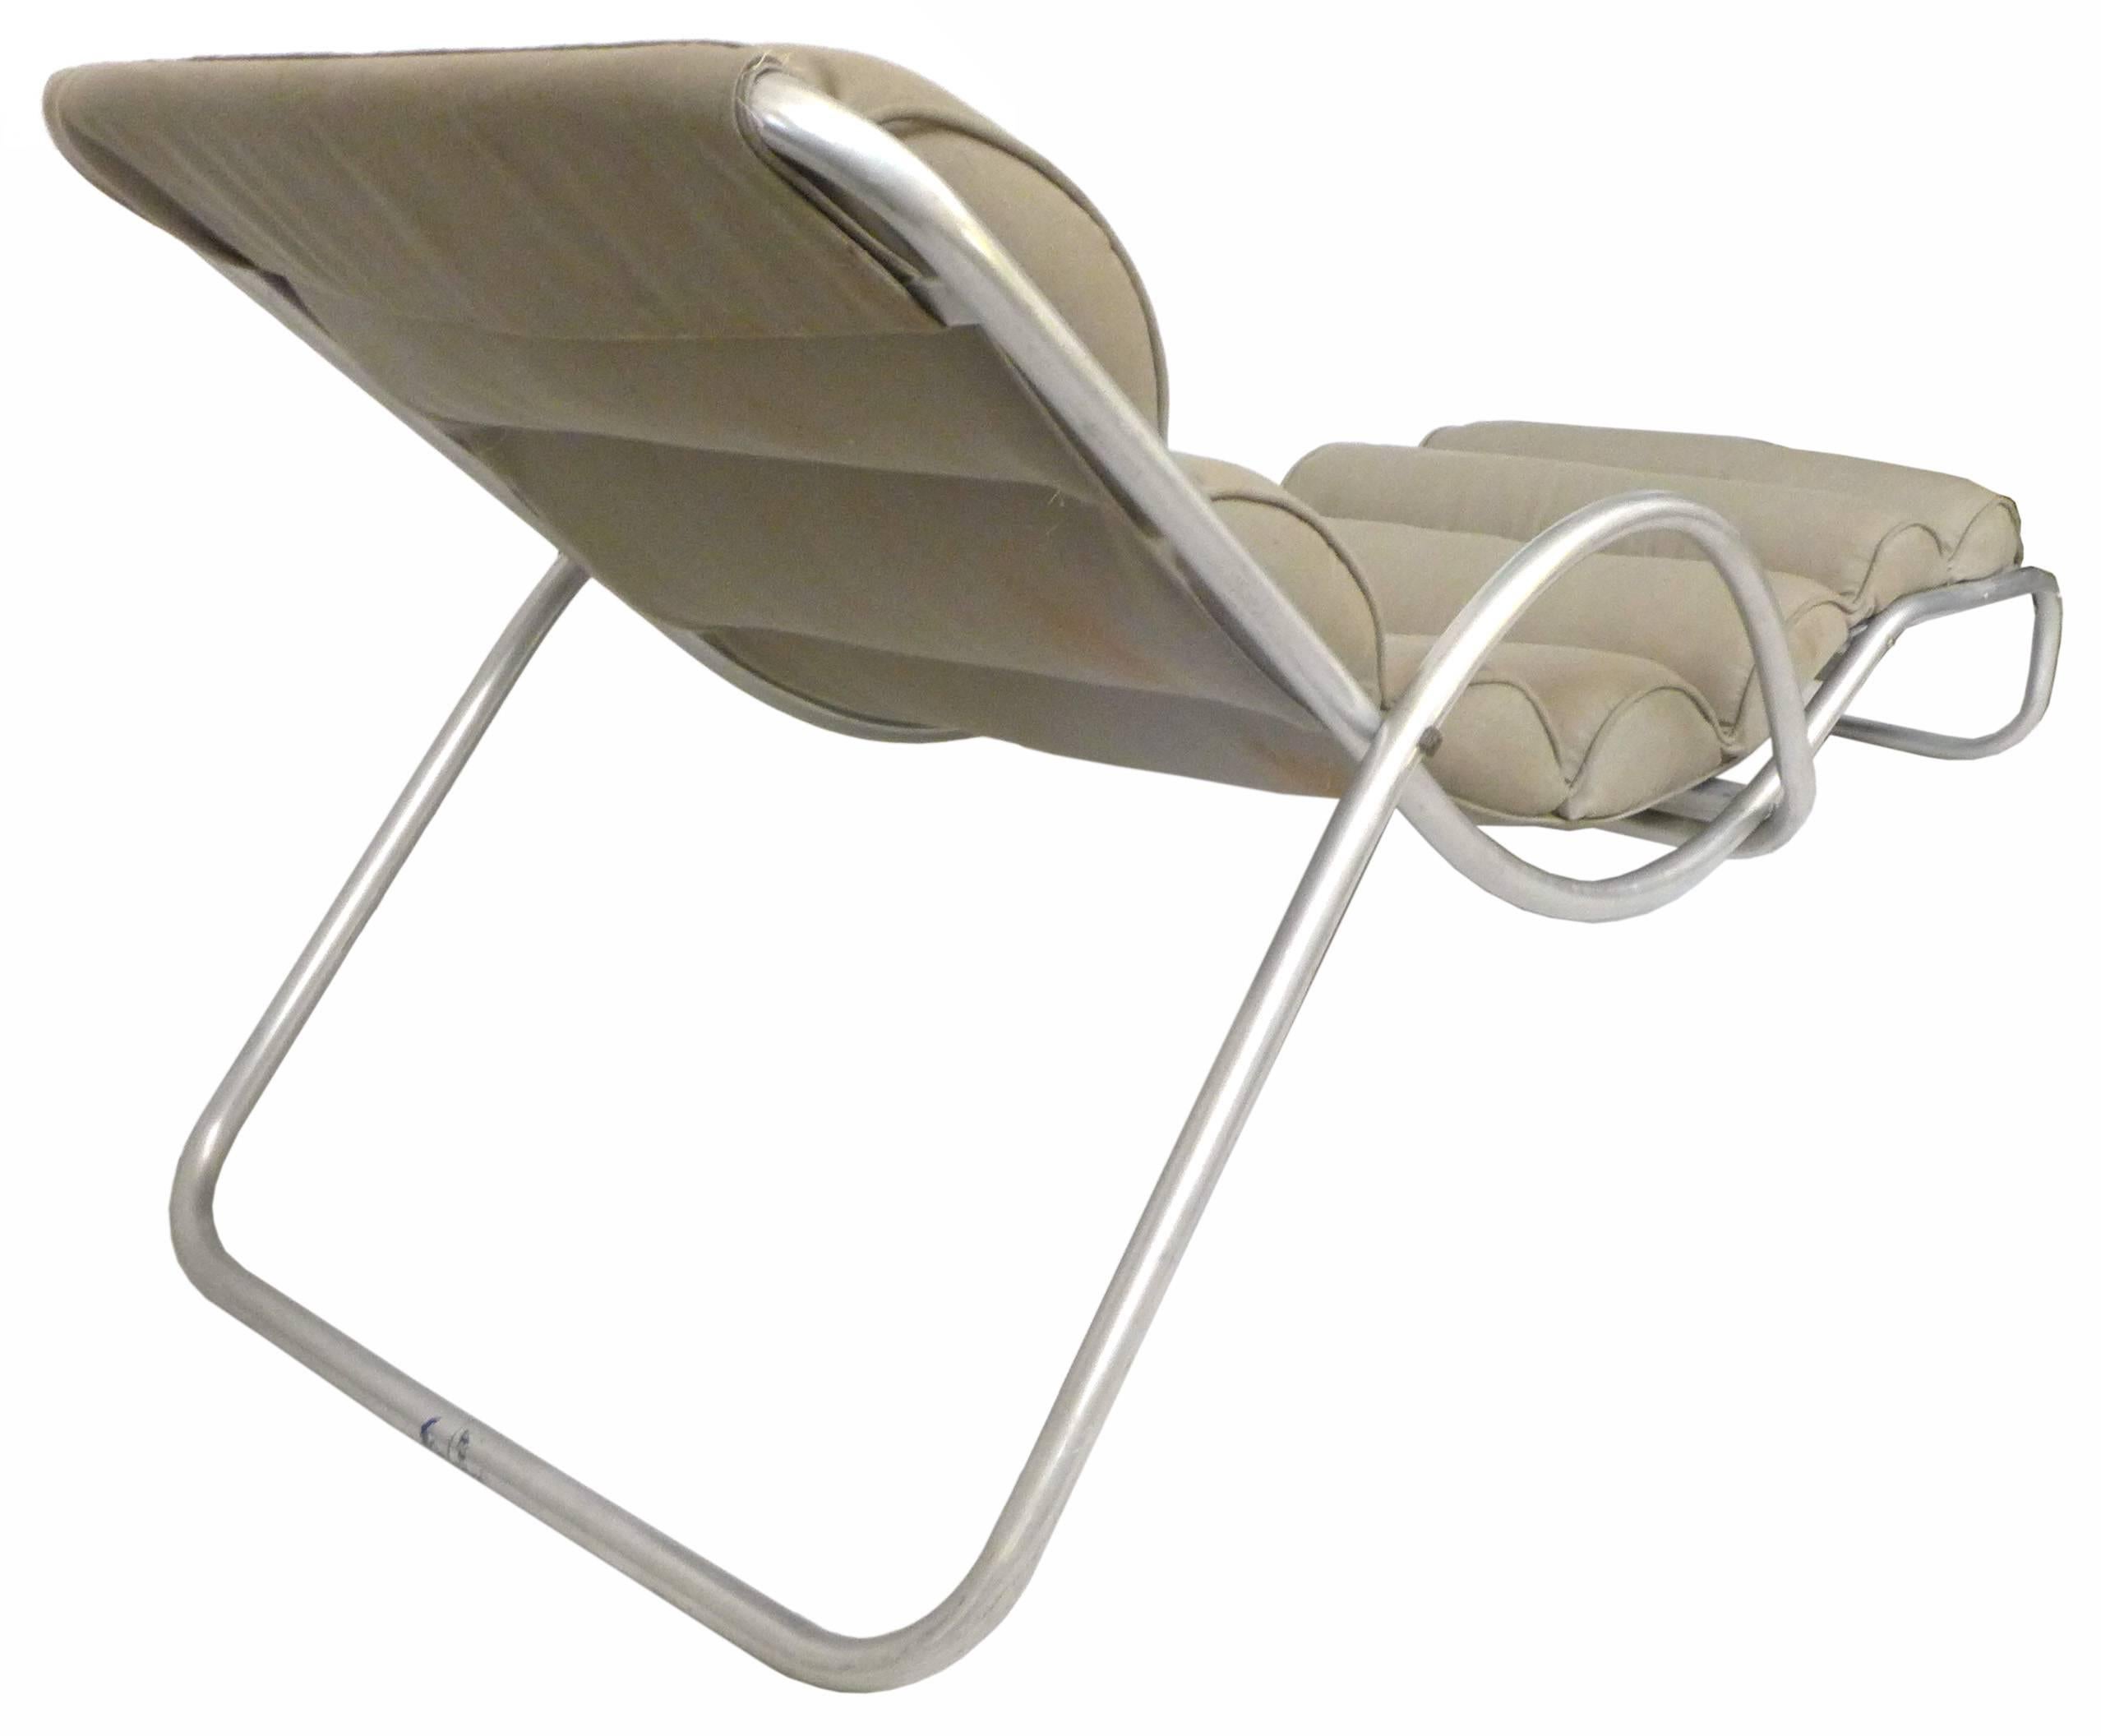 An unusual and sexy chaise longue form and a Classic example of American Machine Age Industrial Design. An elegant and undulating seating concept, manufactured in tubular aluminum by the infamous military manufacturing company, Halliburton. A very